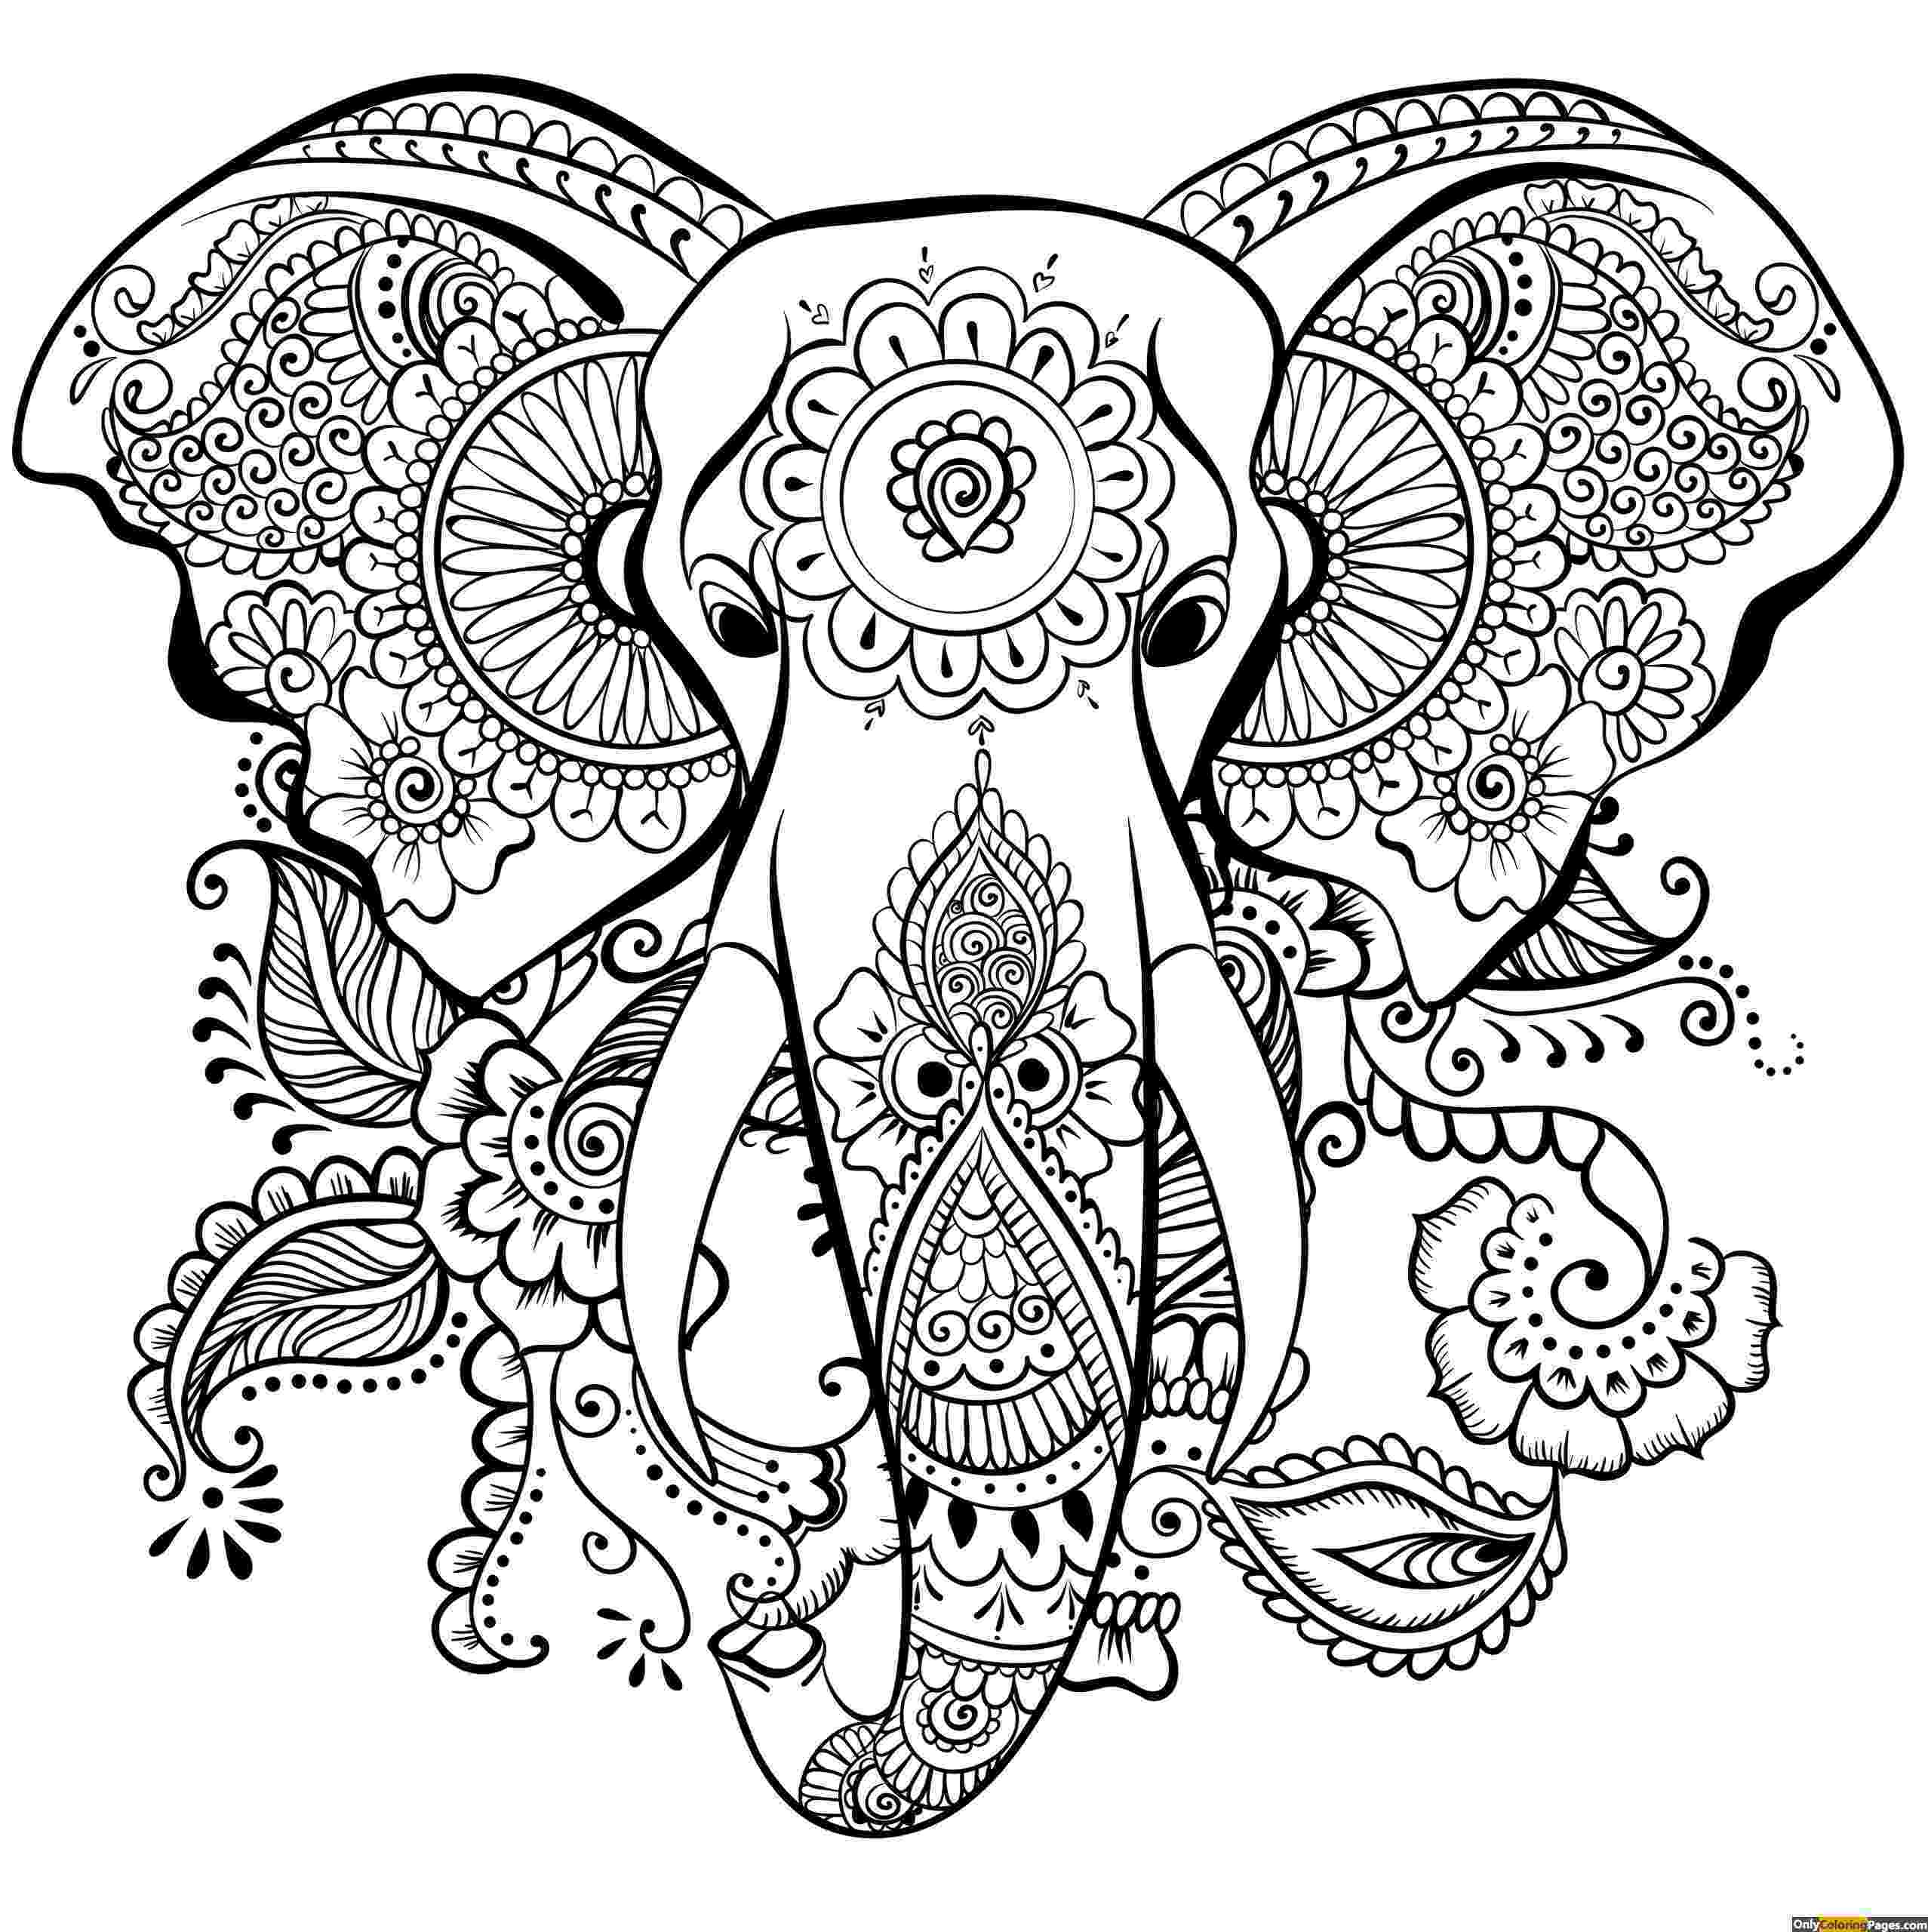 mandala coloring pages online color your stress away with mandala coloring pages skip pages mandala online coloring 1 1